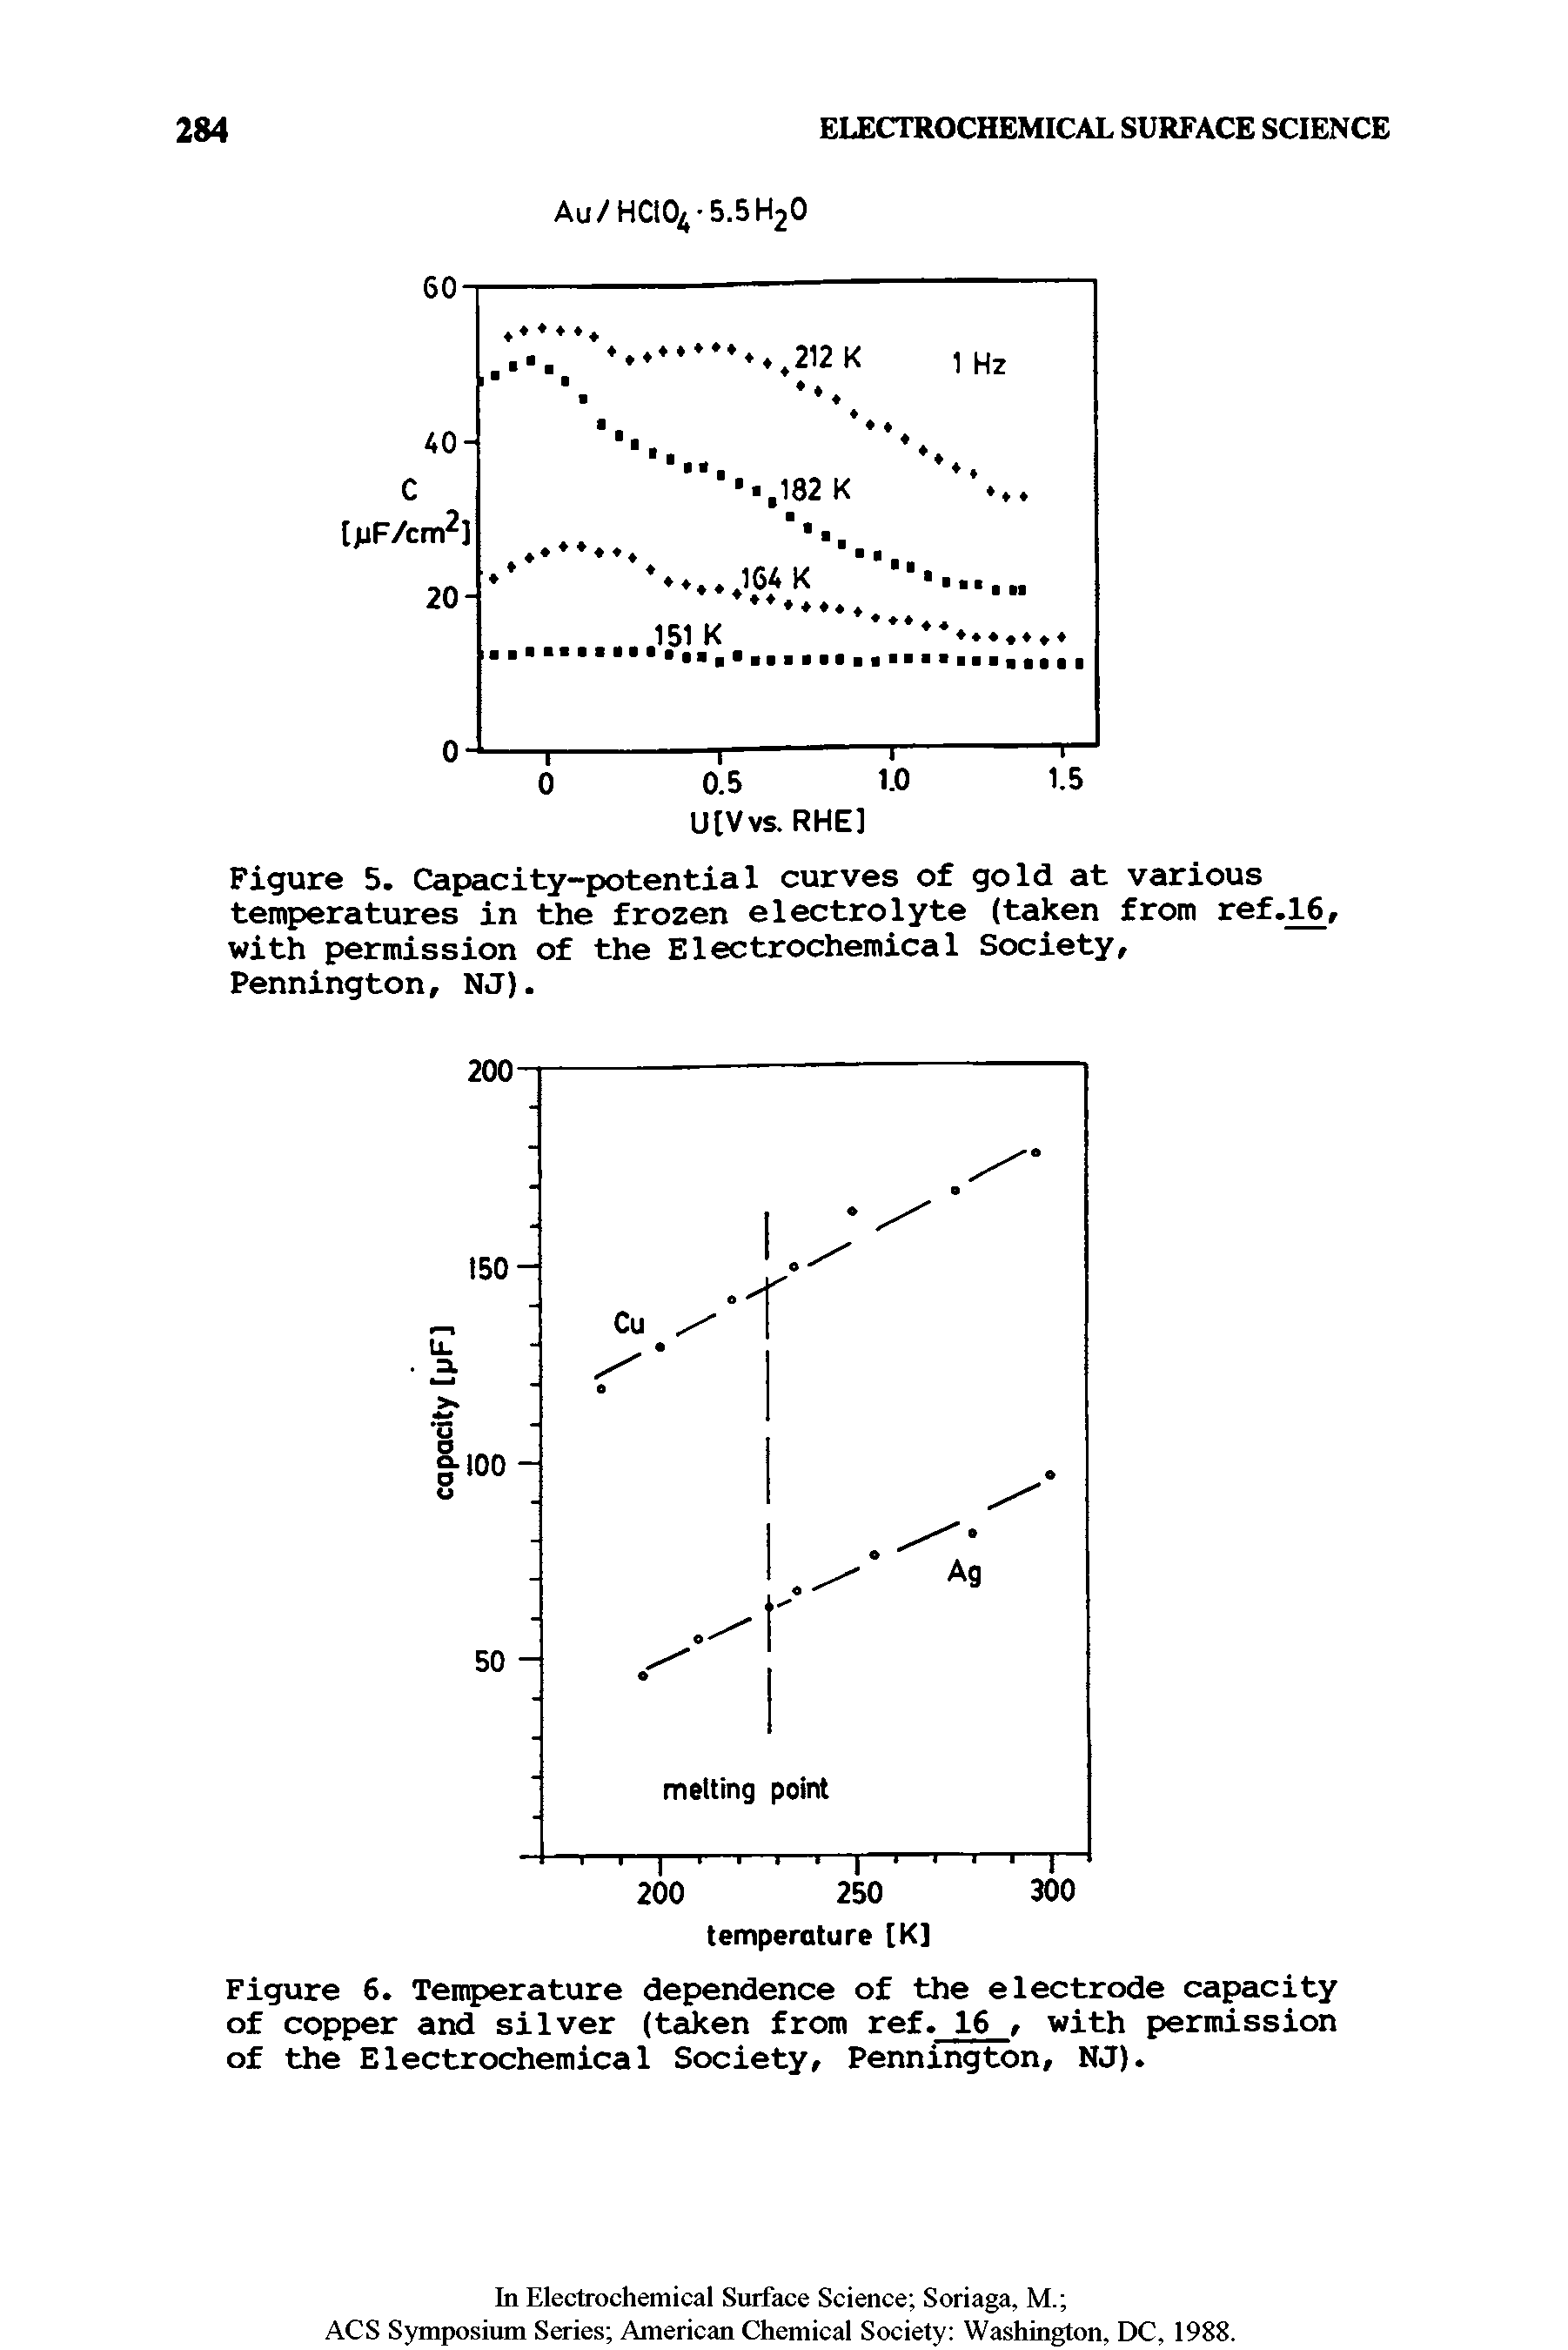 Figure 6. Temperature dependence of the electrode capacity of copper and silver (taken from ref. 16, with permission of the Electrochemical Society, Pennington, NJ).